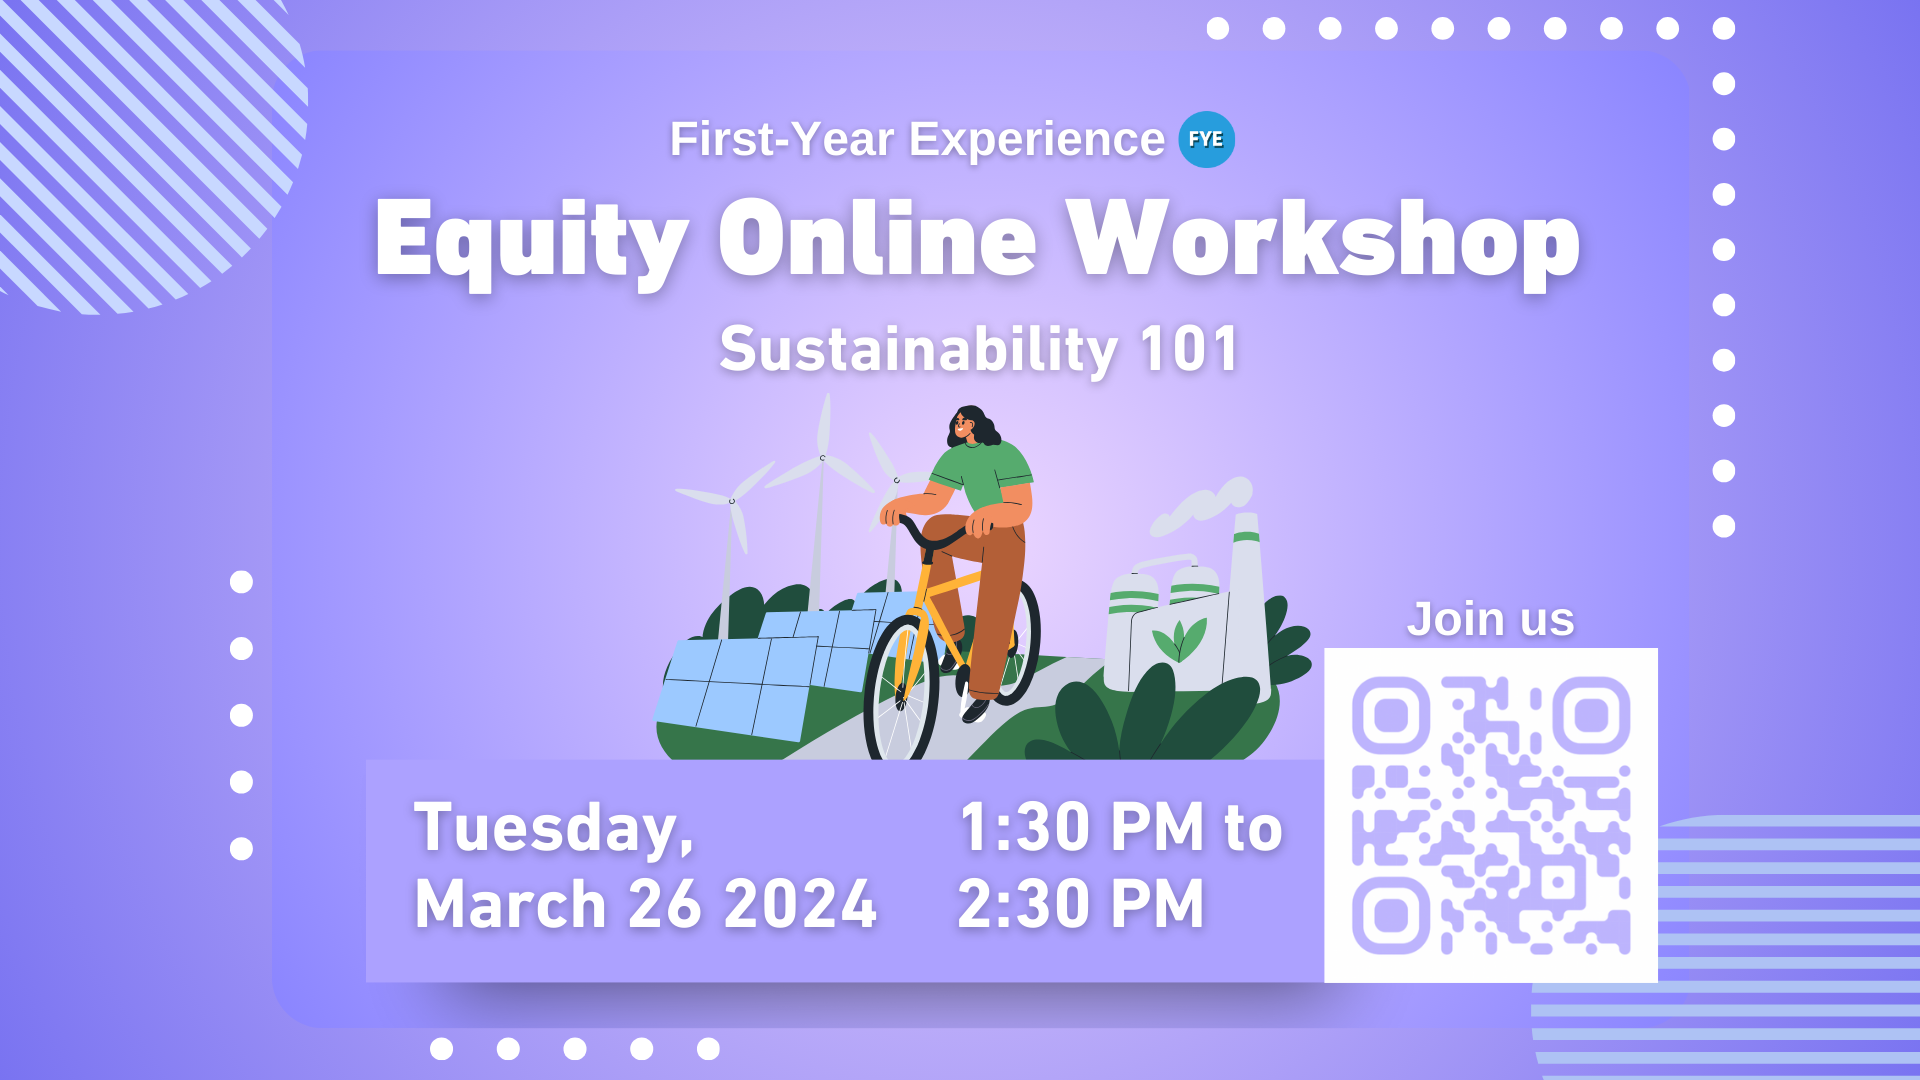 Poster for Equity Online Workshop: Sustainability 101. On the bottom right there is a QR to scan and register. On the bottom right there is the event date: March 26, from 1:30 PM to 2:30 PM.